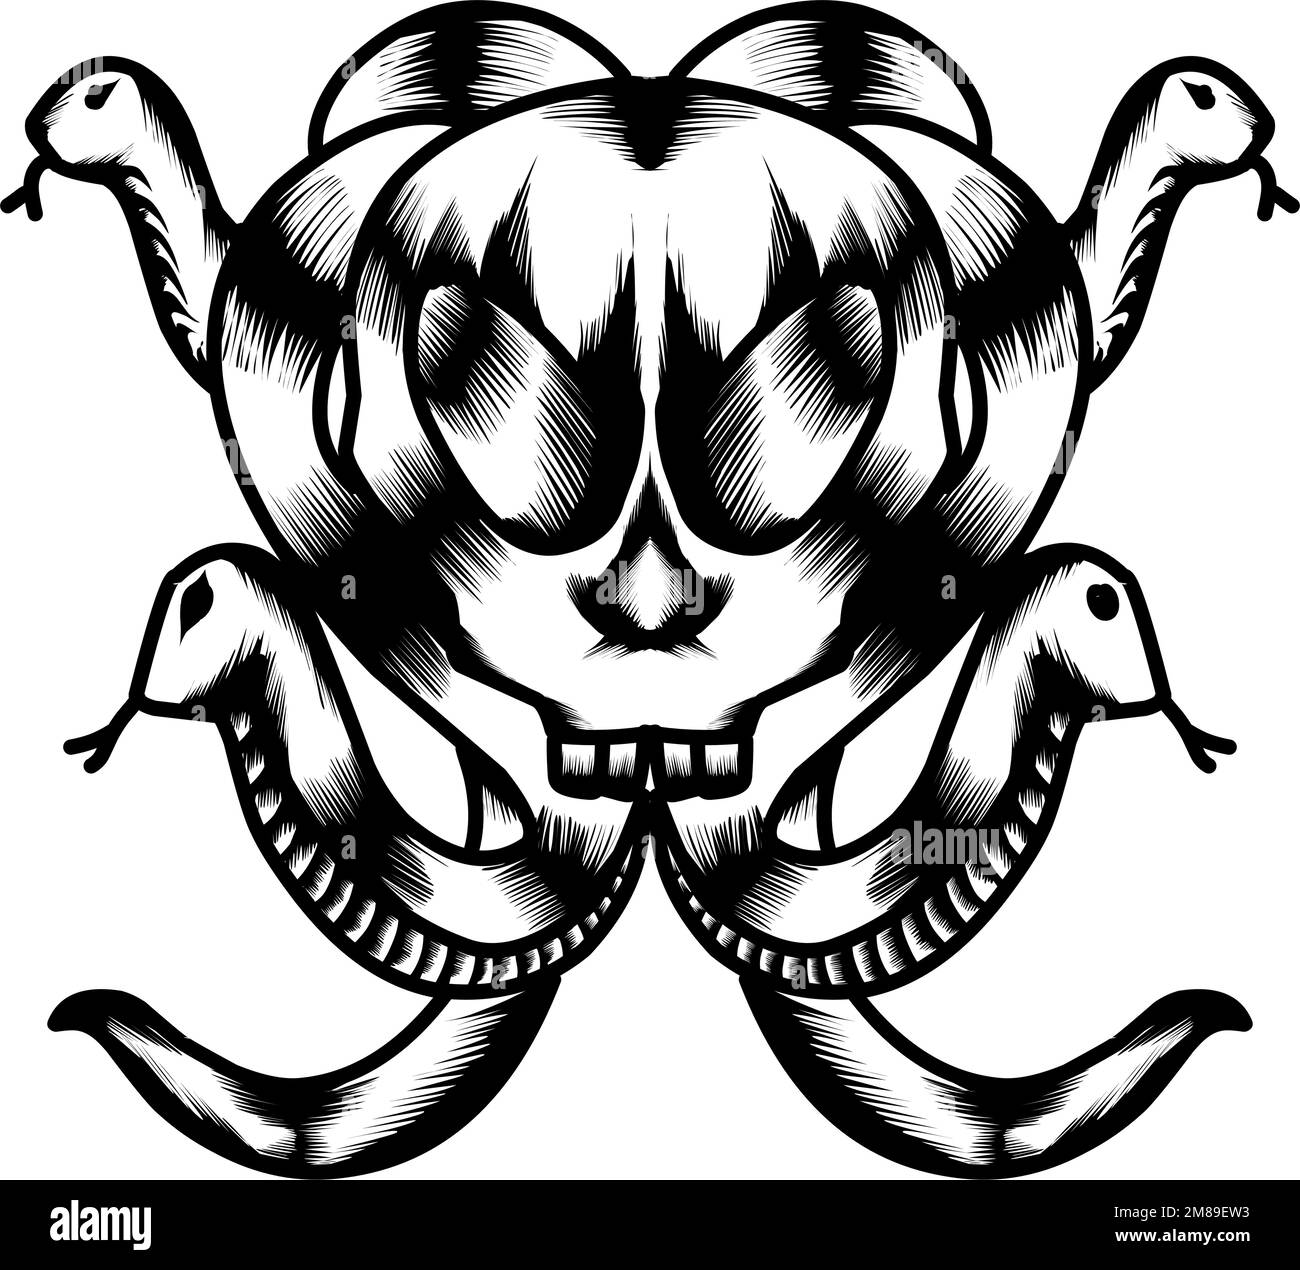 Skull Snake Design perfect for tshirt design, logo, sticker and others Stock Vector